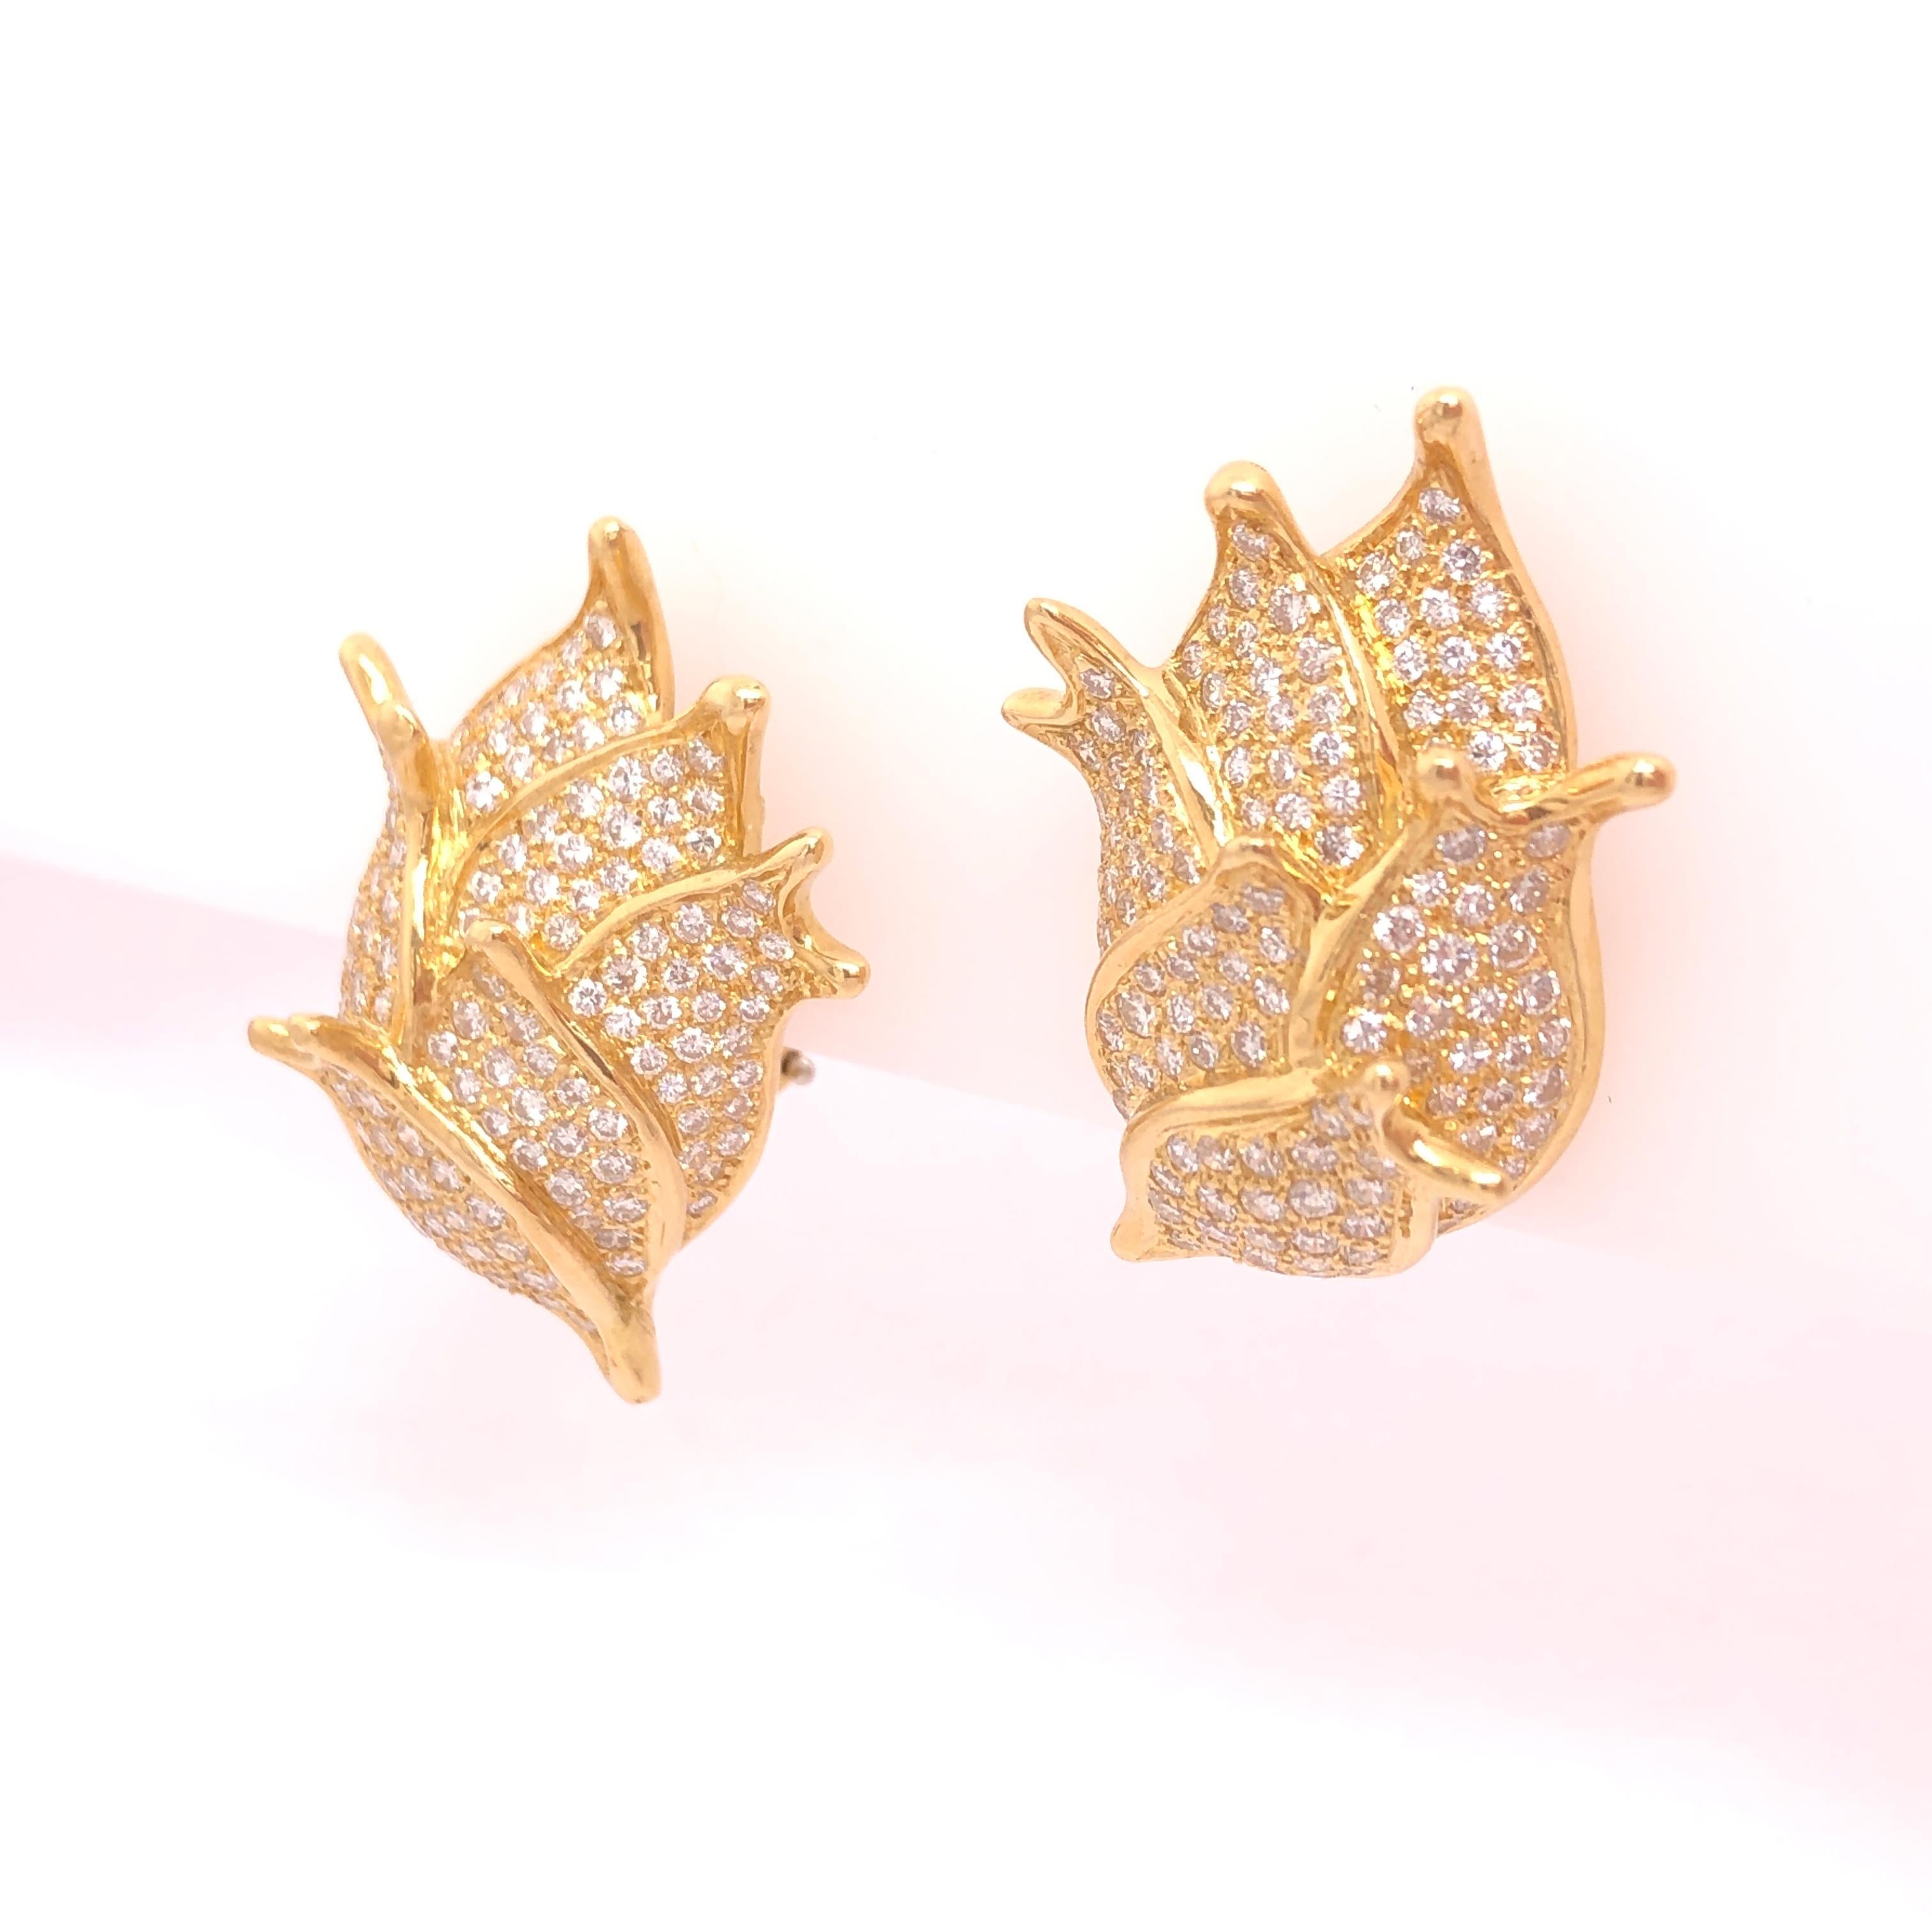 At first glance this beautiful pair of earrings resemble a flower bud or sea shell. Upon closer inspection you start to realize the earrings are composed a cluster of diamond encrusted fish. The total diamond carat weight is approximately 3.50 CT.